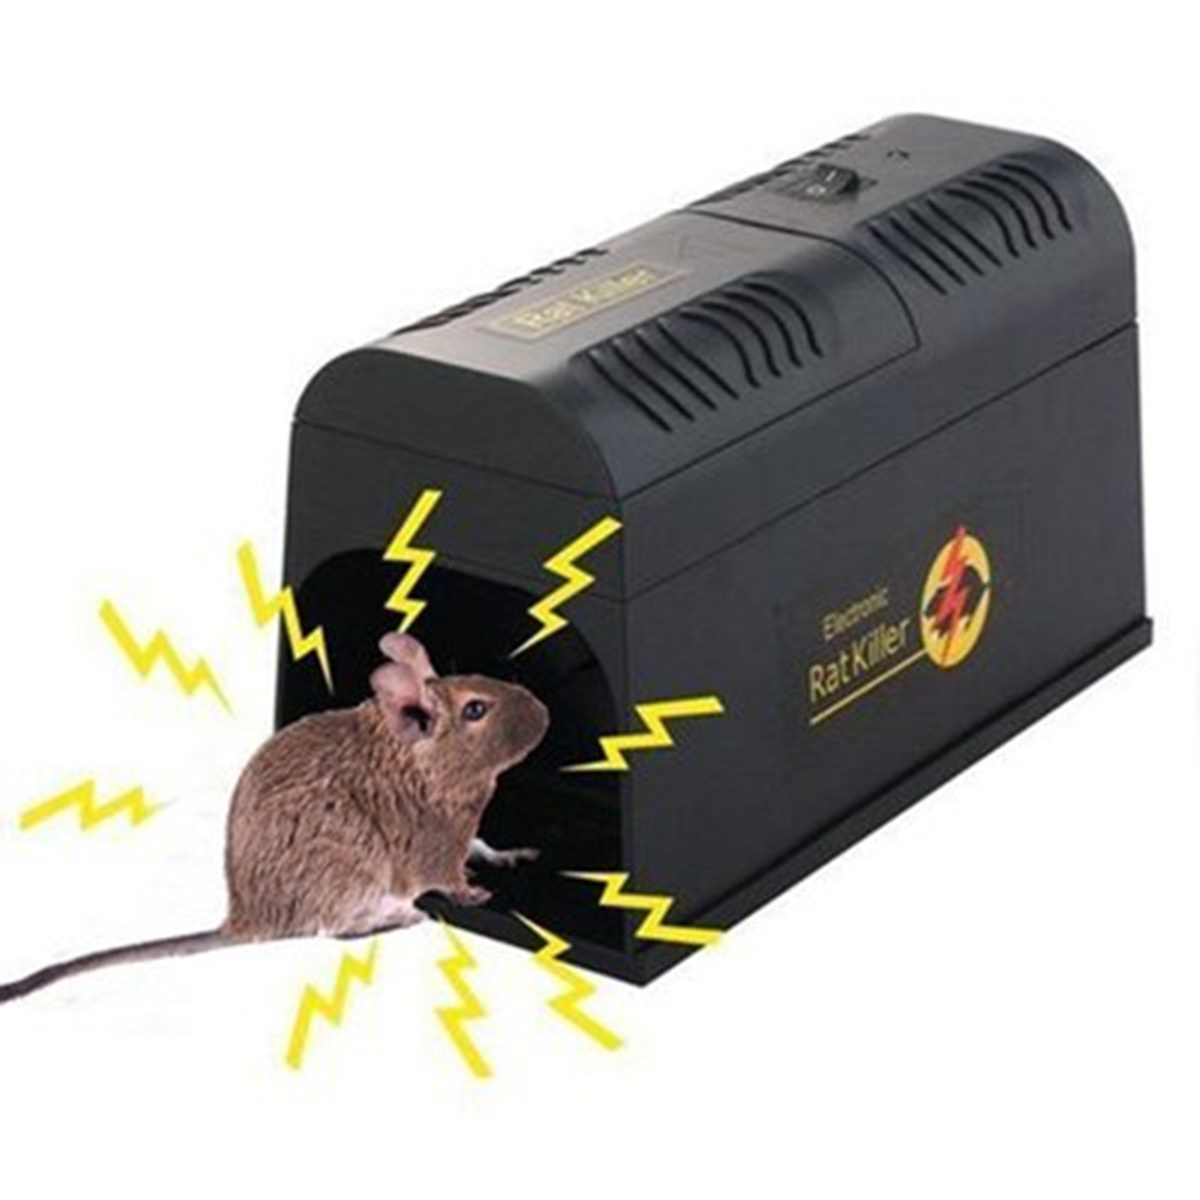 Electronic Rat And Rodent Trap Powfully Kill And Eliminate Rats Mice Or Other Similar Rodents Efficiently And Safely 2